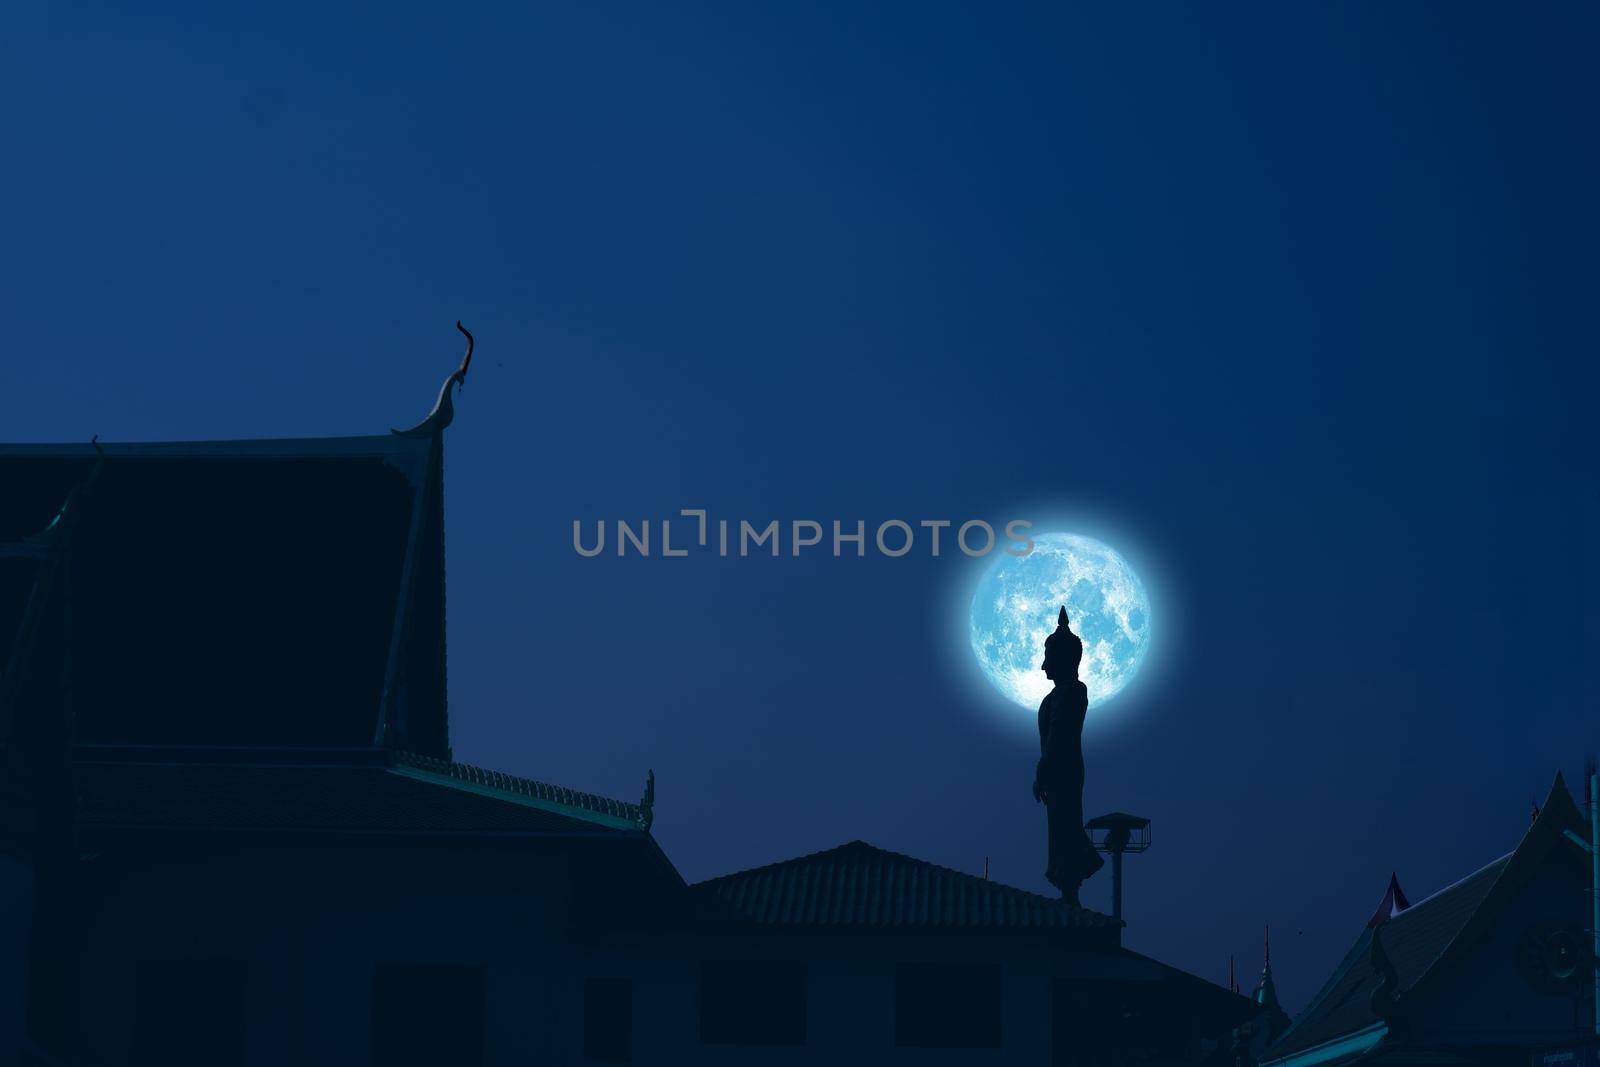 Sunday Buddha and blue moon on night sky in the Asanha bucha day, Elements of this image furnished by NASA